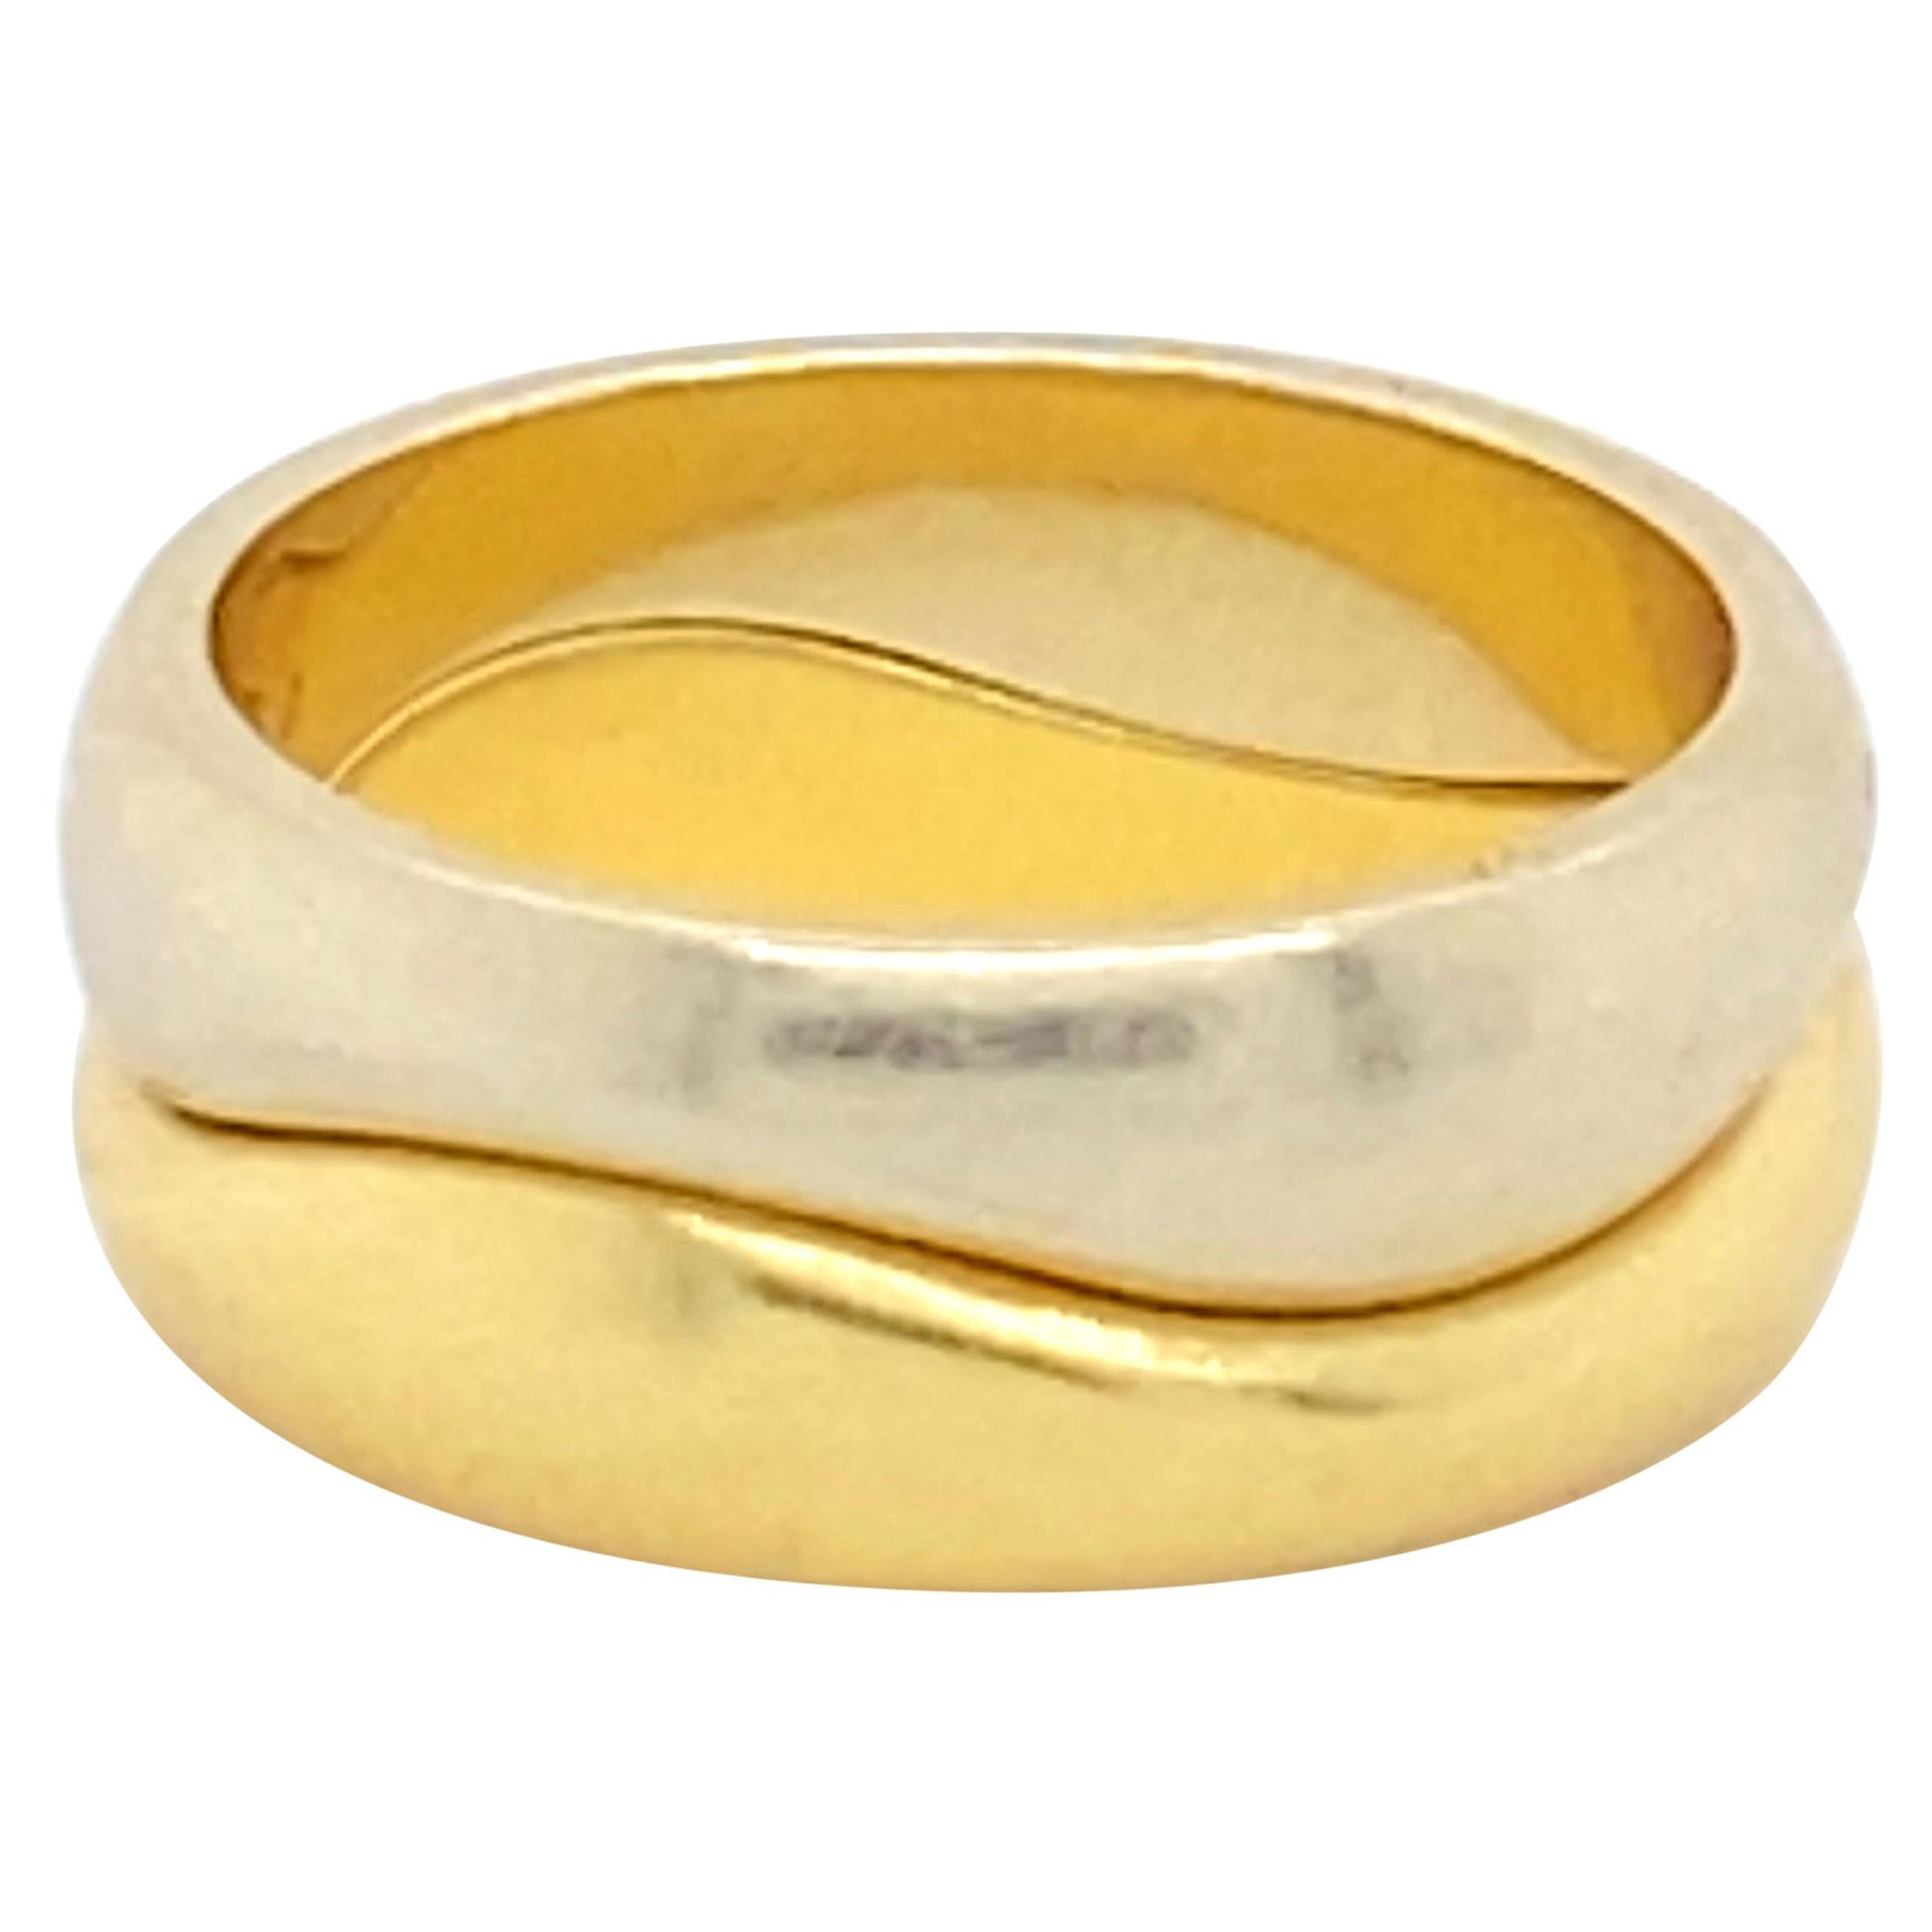 Cartier Wave Stack Rings 18k Gold Set of Two